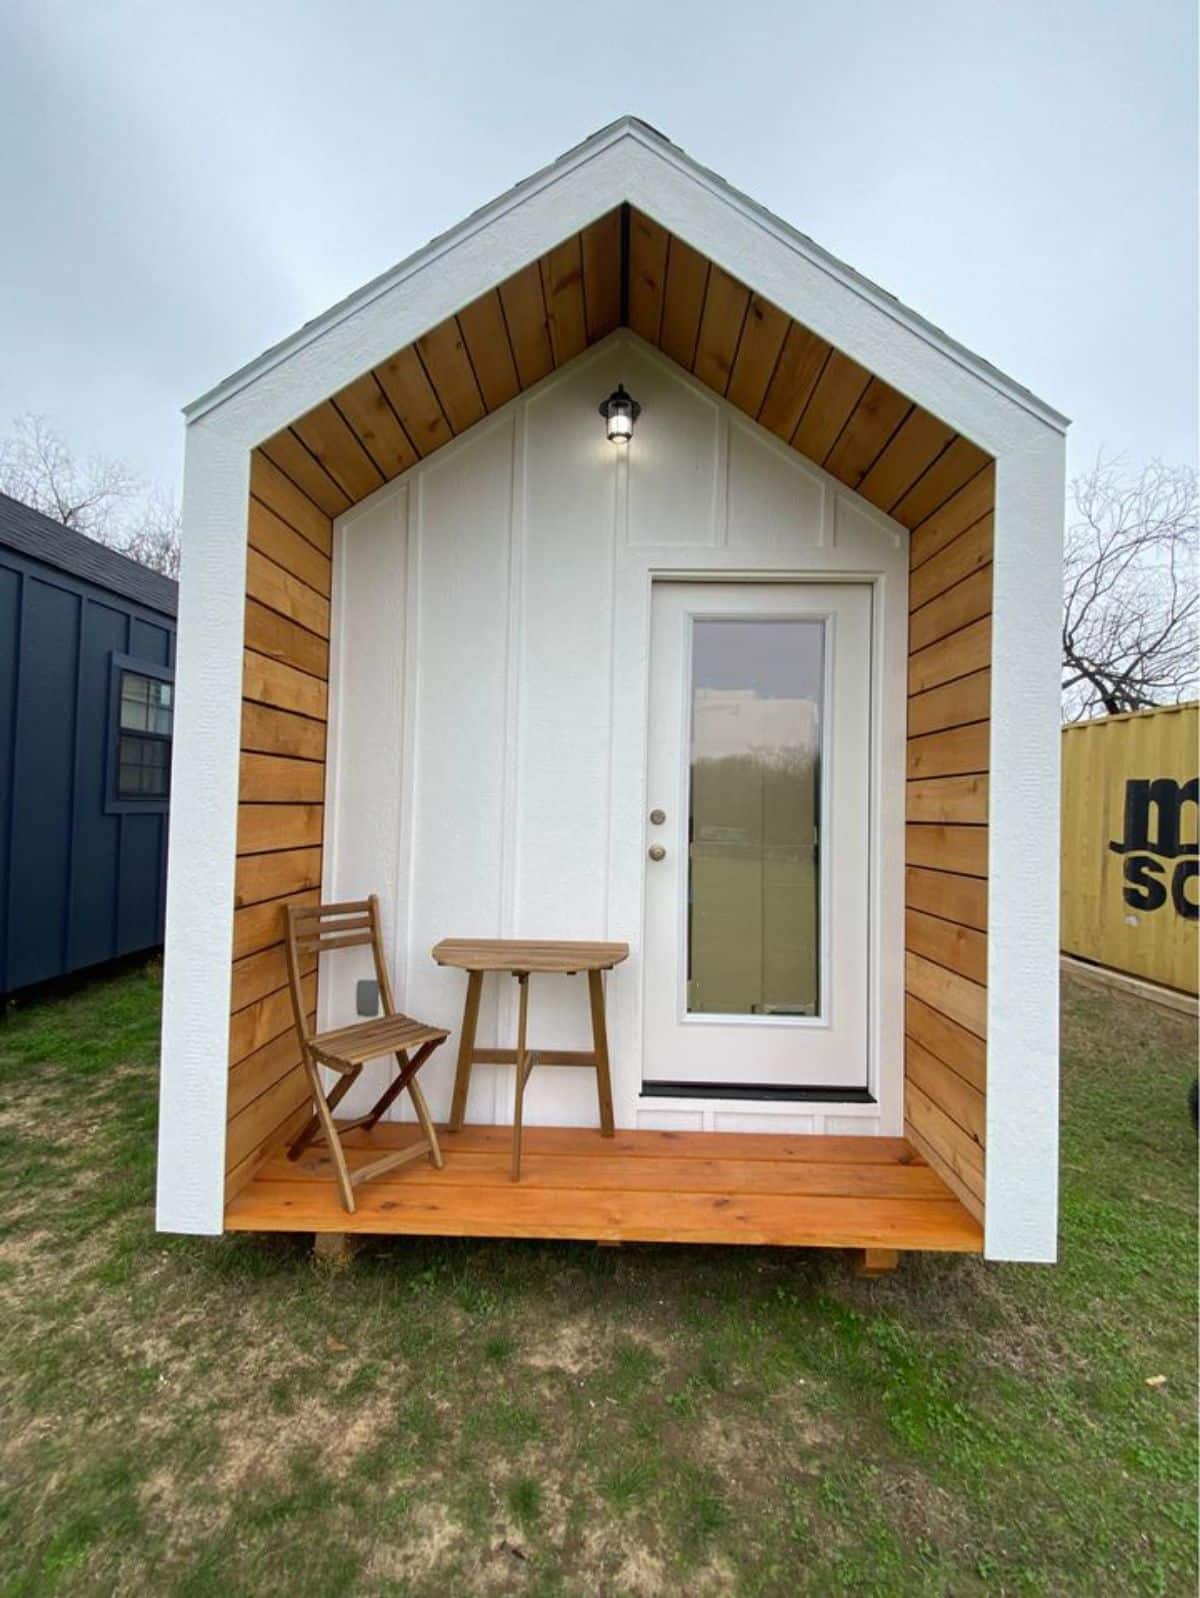 Main entrance view of Affordable Tiny Home with small table and chair on the porch